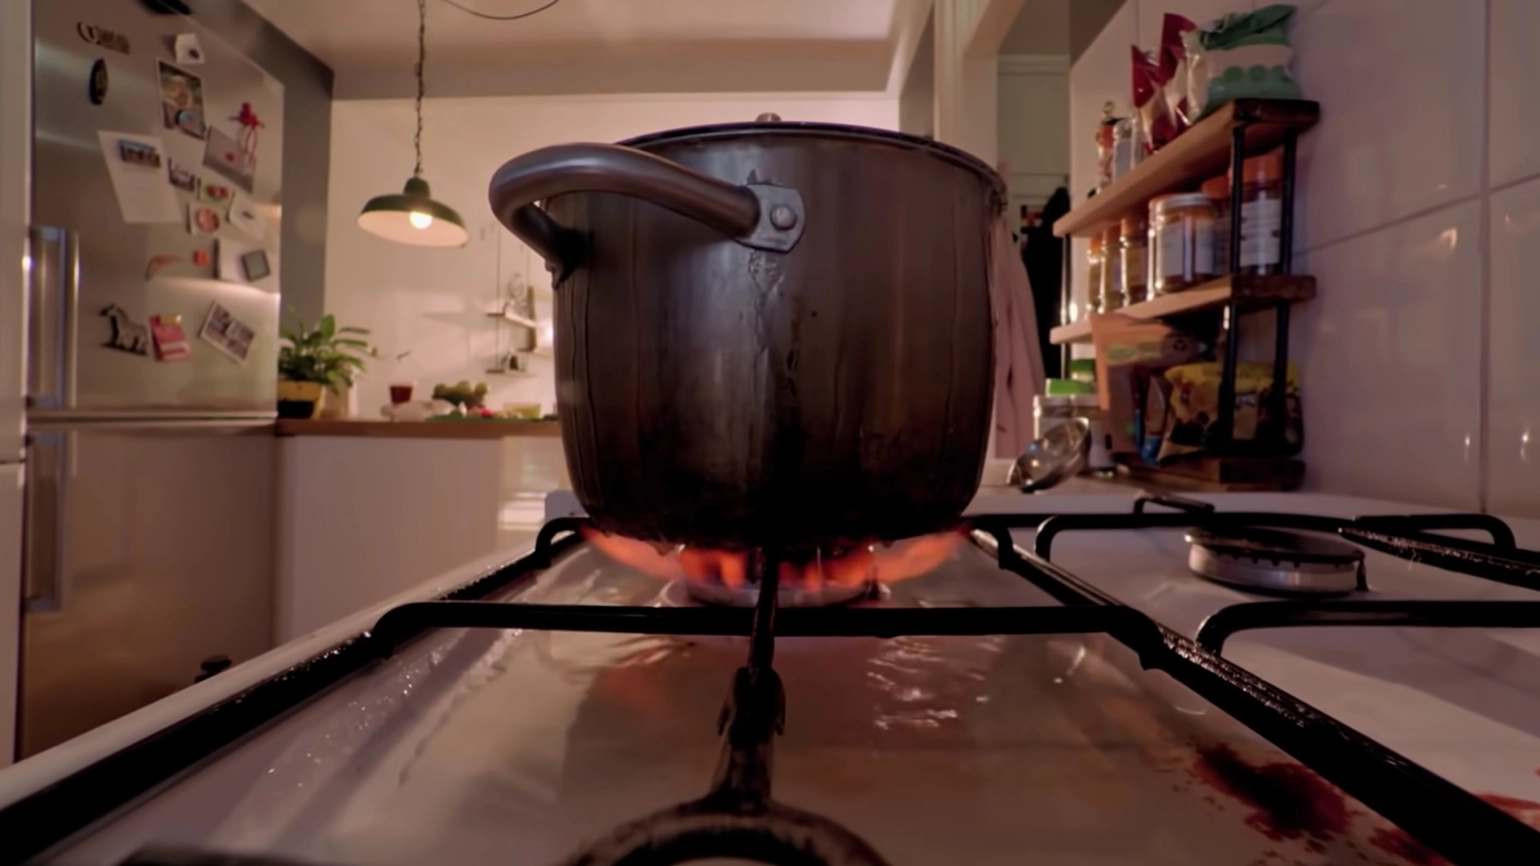 A boiling pot on the stove